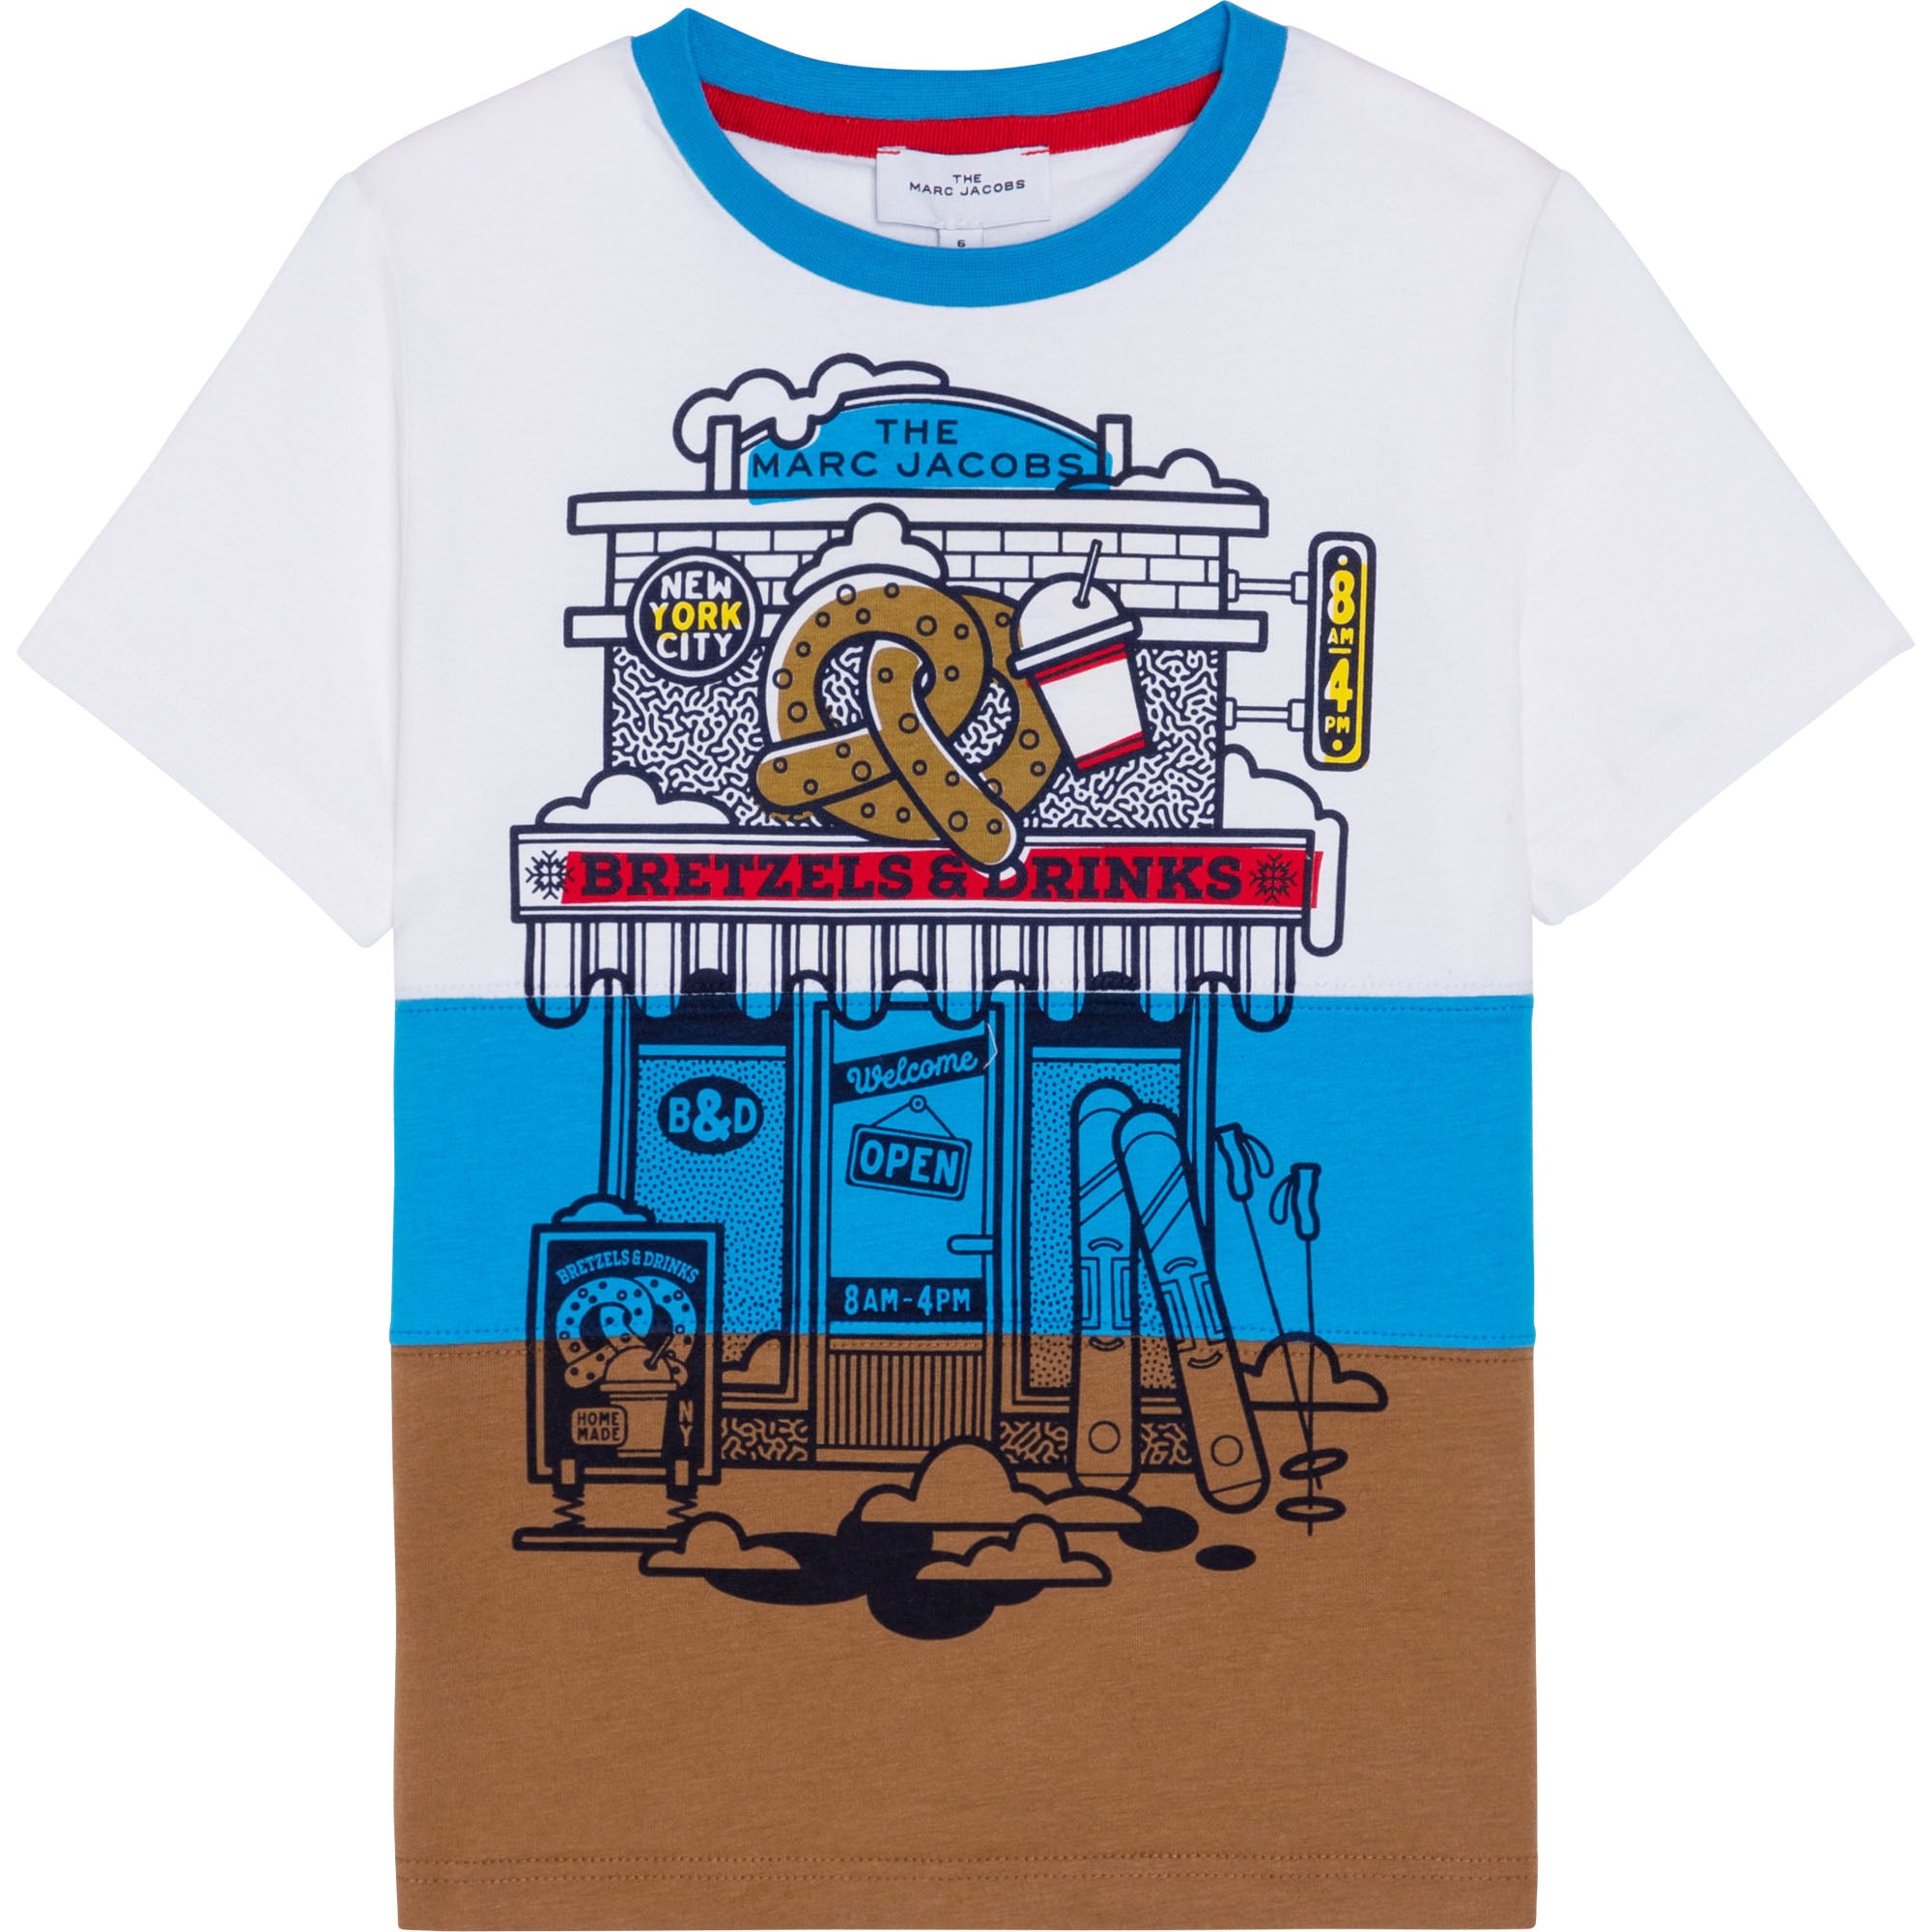 SS COLOR BLOCK T-SHIRT, FOOD STAND GRAPHIC, OFF WHITE